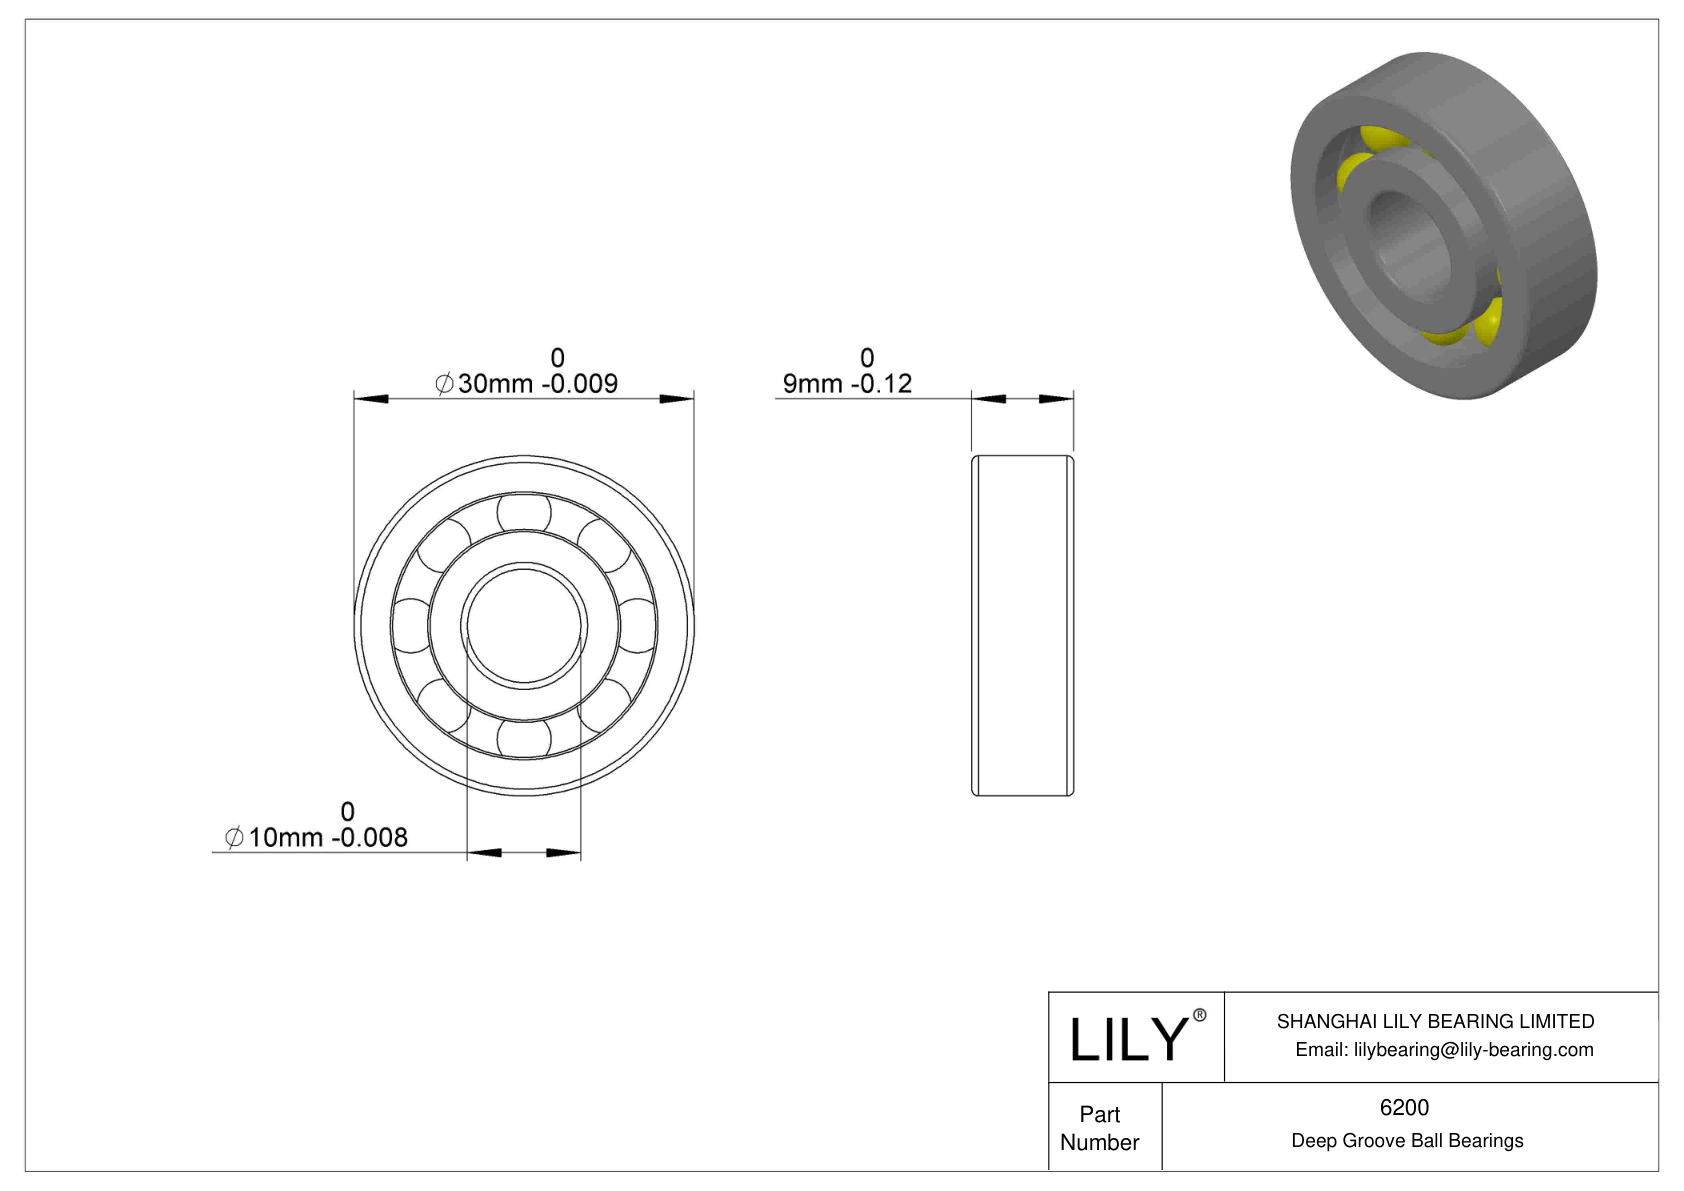 LILY-BS620042-20 POM Coated Bearing cad drawing